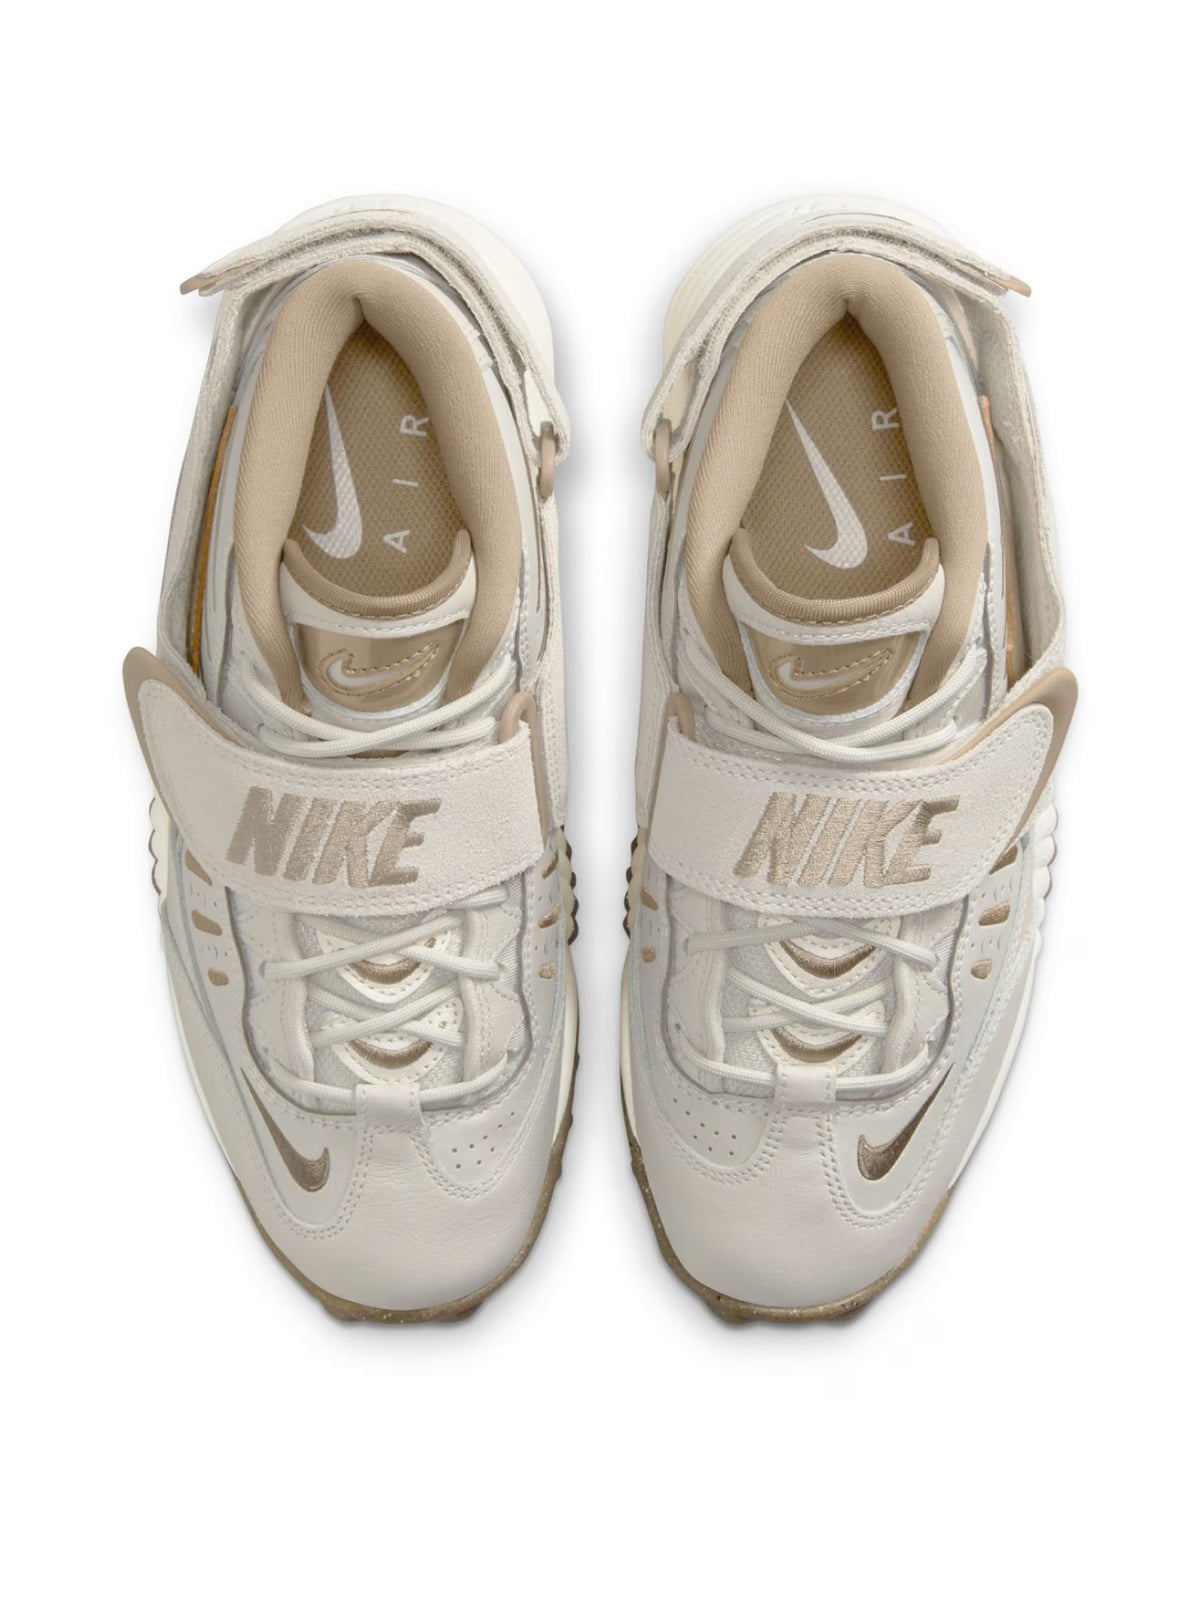 Nike-OUTLET-SALE-Air Adjust Force Sneakers-ARCHIVIST